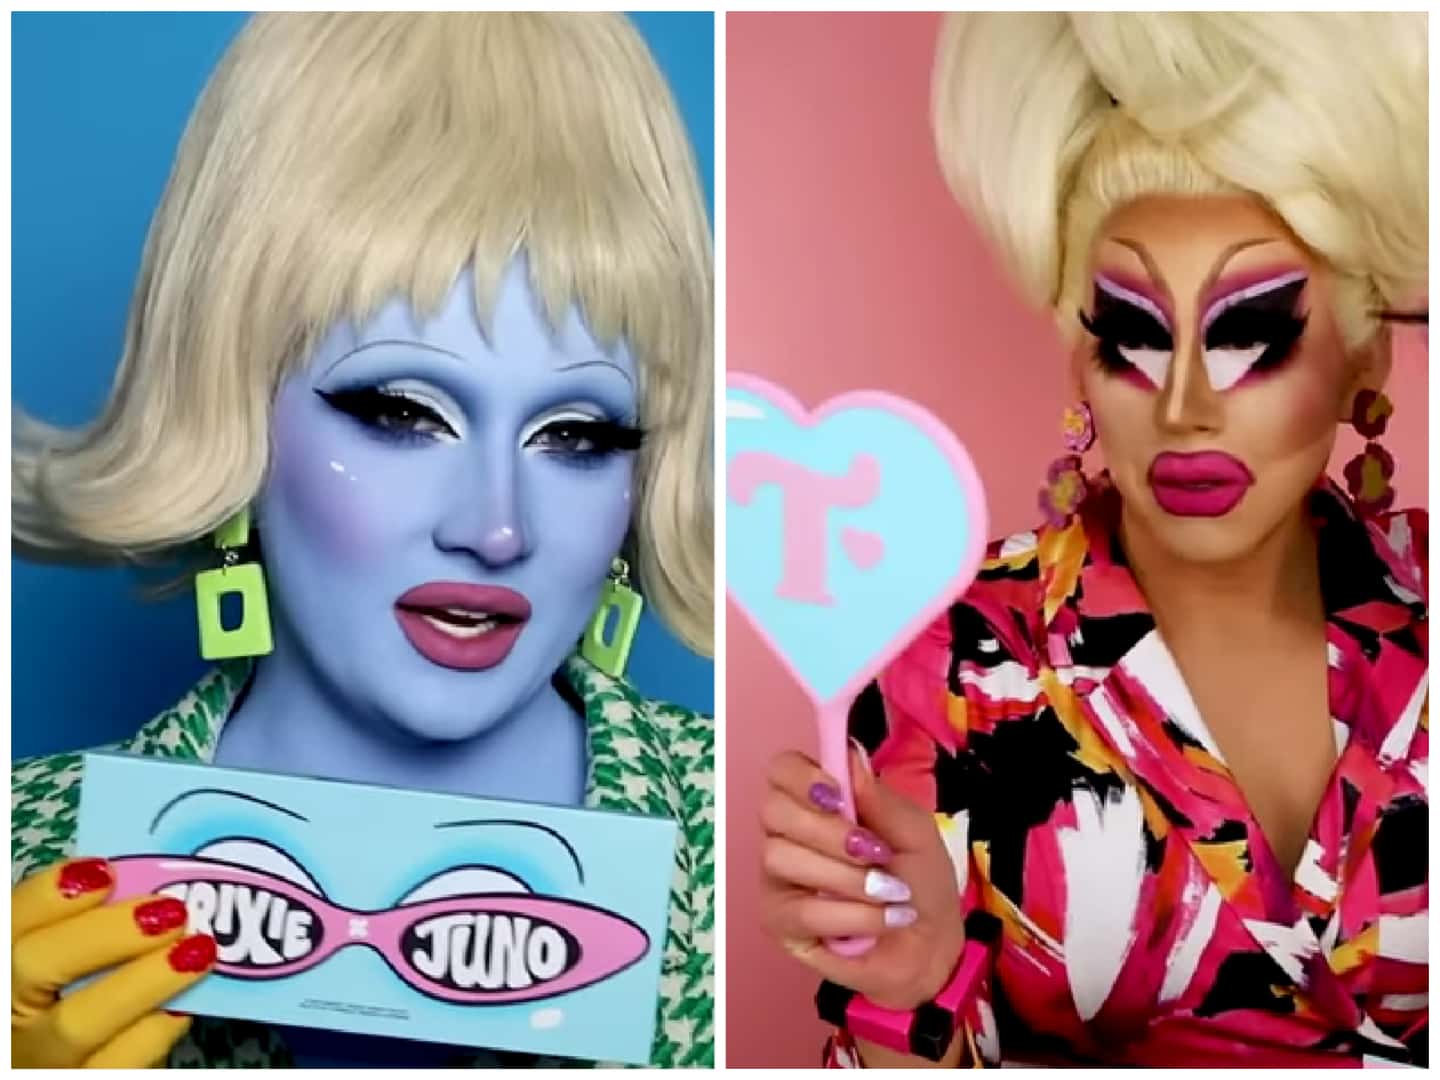 Trixie Mattel and Juno Birch are releasing a stunning makeup collection